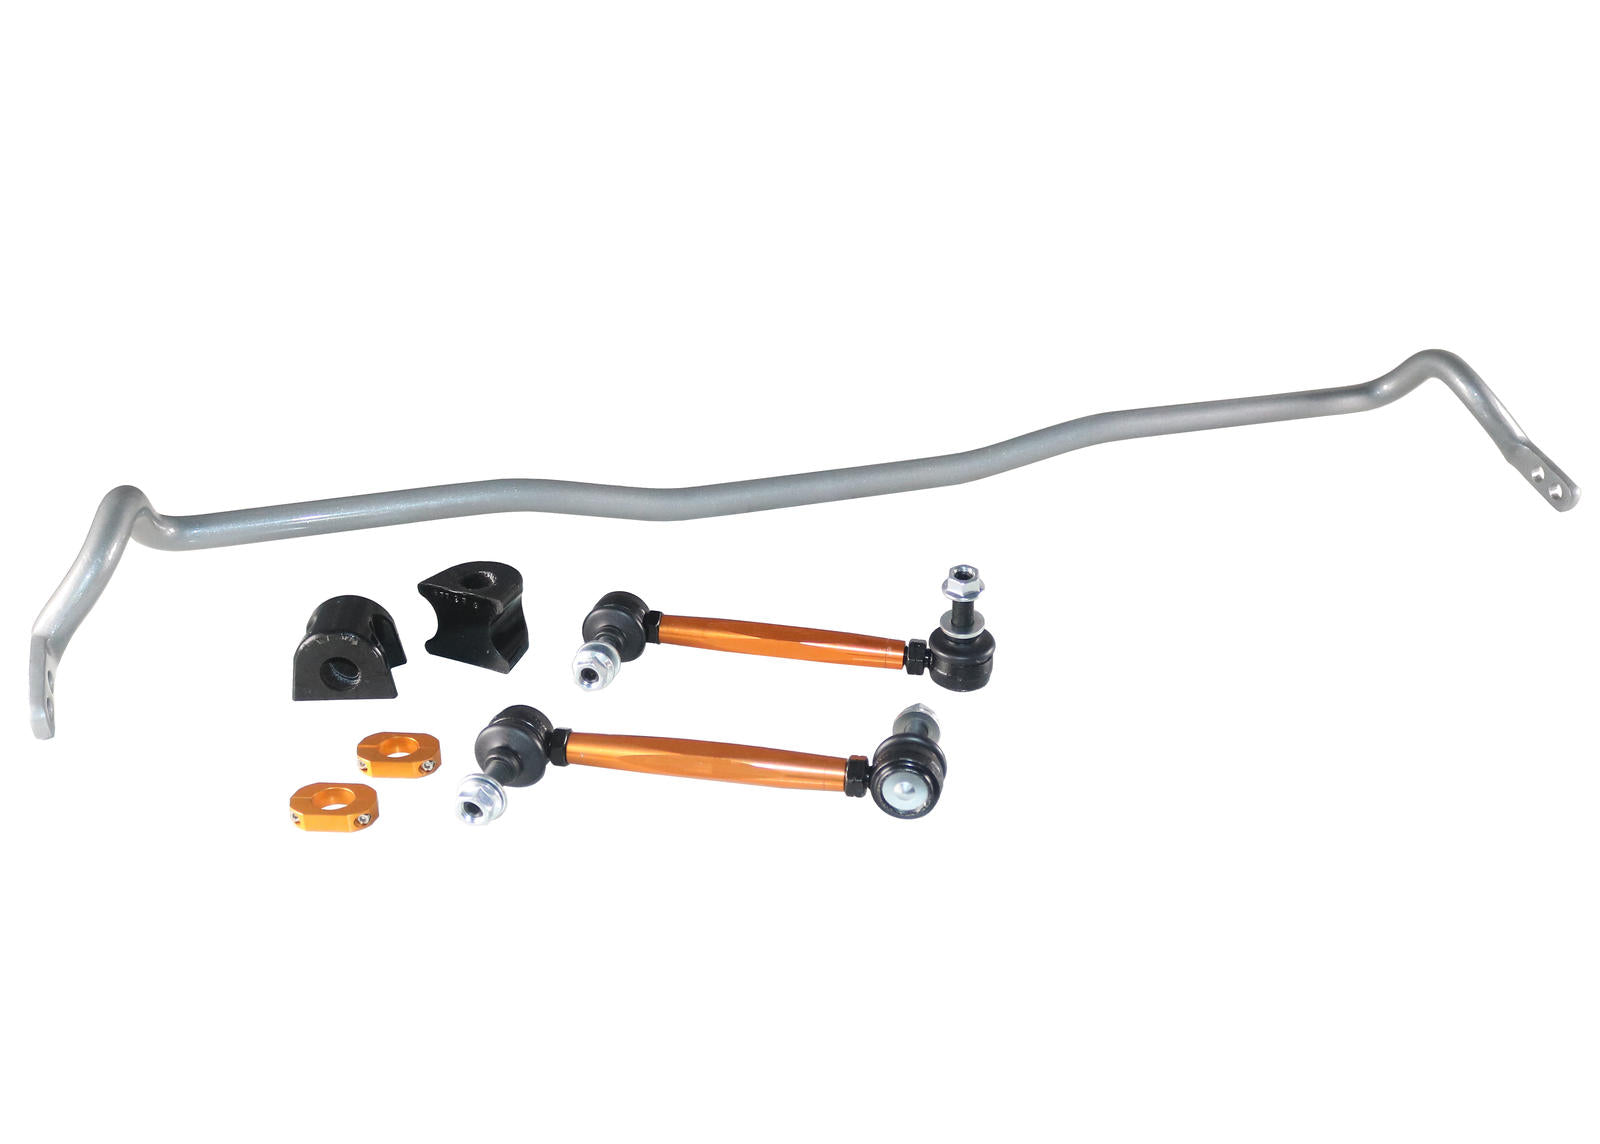 Front Sway Bar - 22mm 2 Point Adjustable To Suit Subaru BRZ And Toyota 86